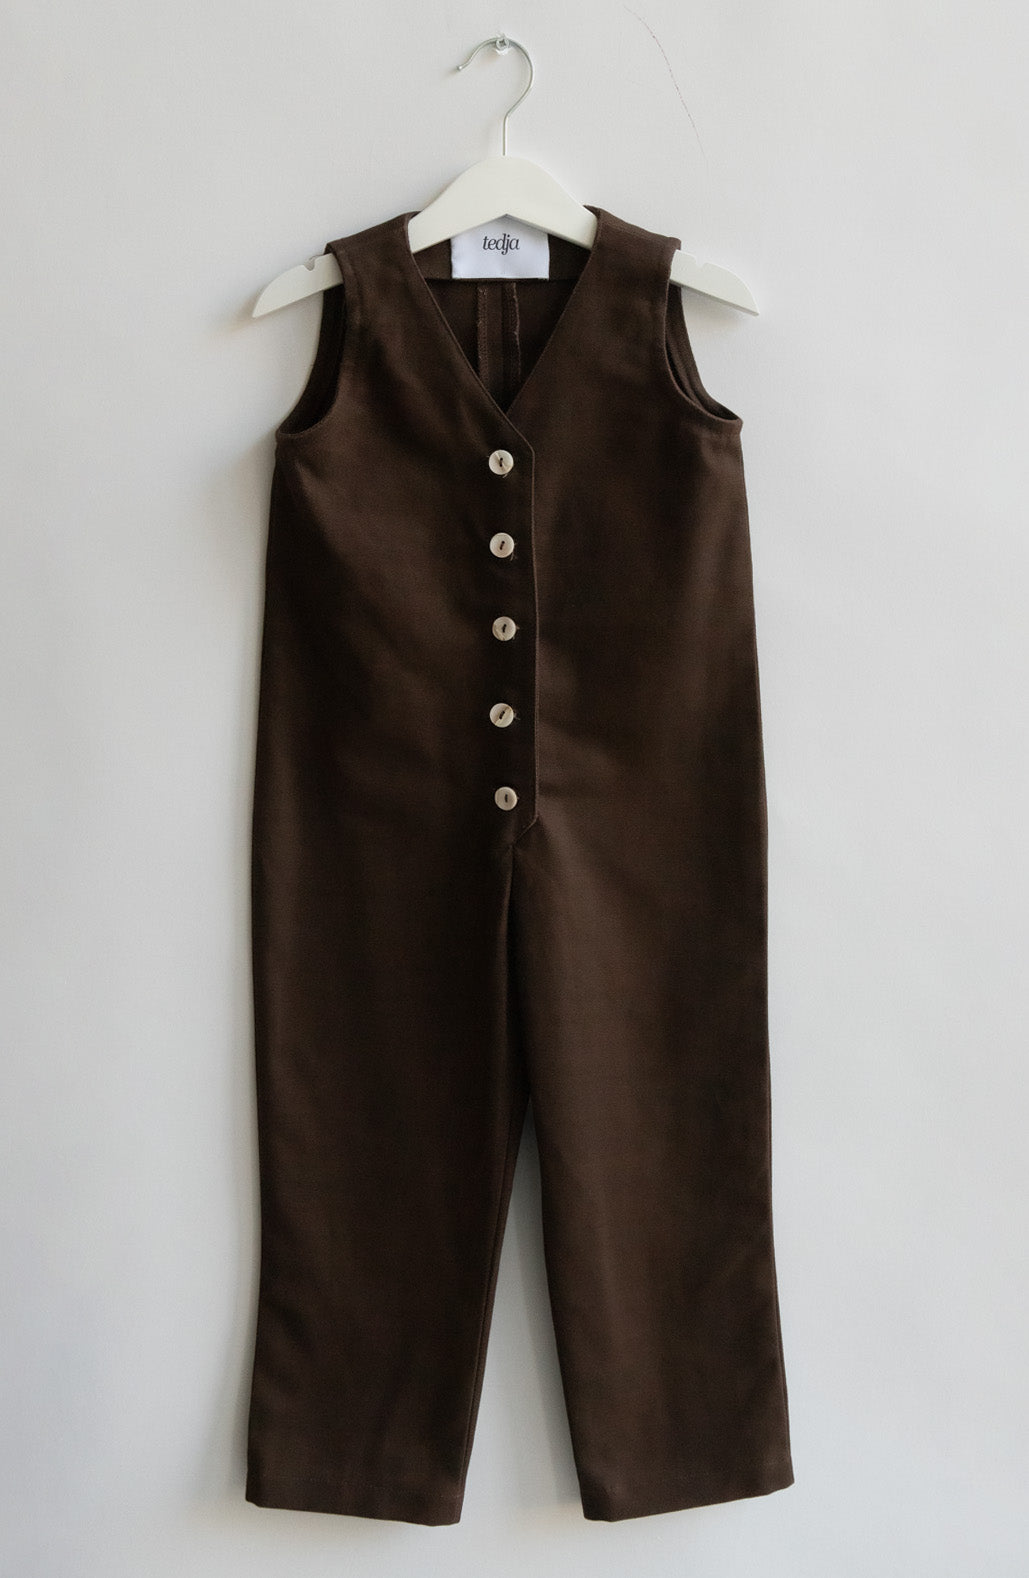 Dark Brown umber chocolate color Kids Mini Jumpsuit overall workwear cotton canvas 5 buttons v-neck OEKO-TEX sustainable clothes handmade